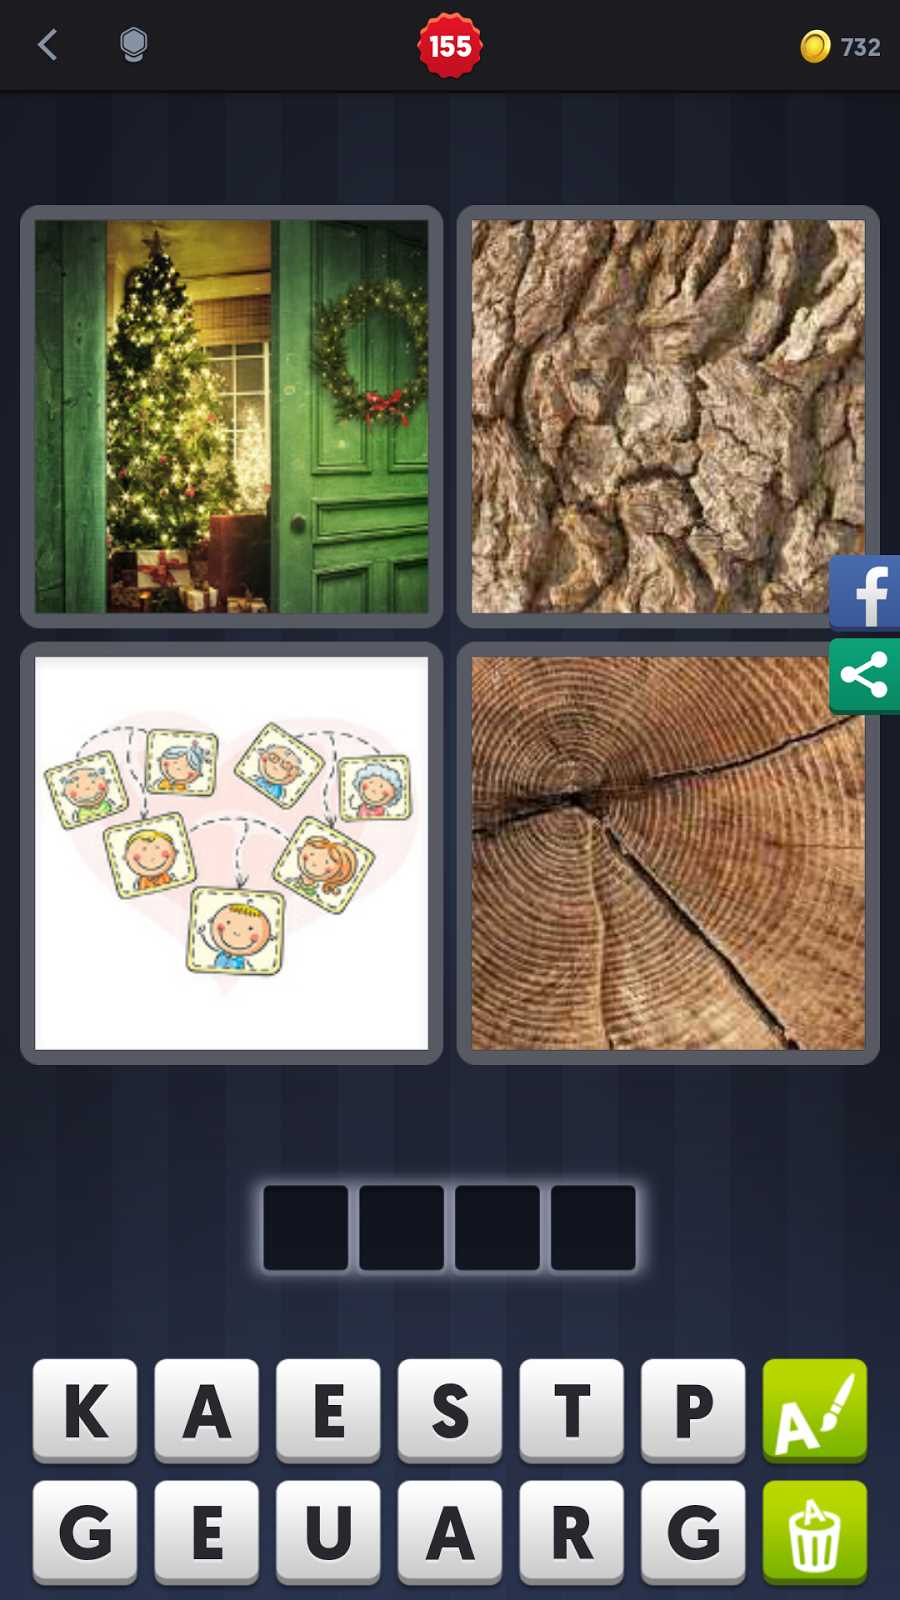 How to solve 4pics1word puzzles?